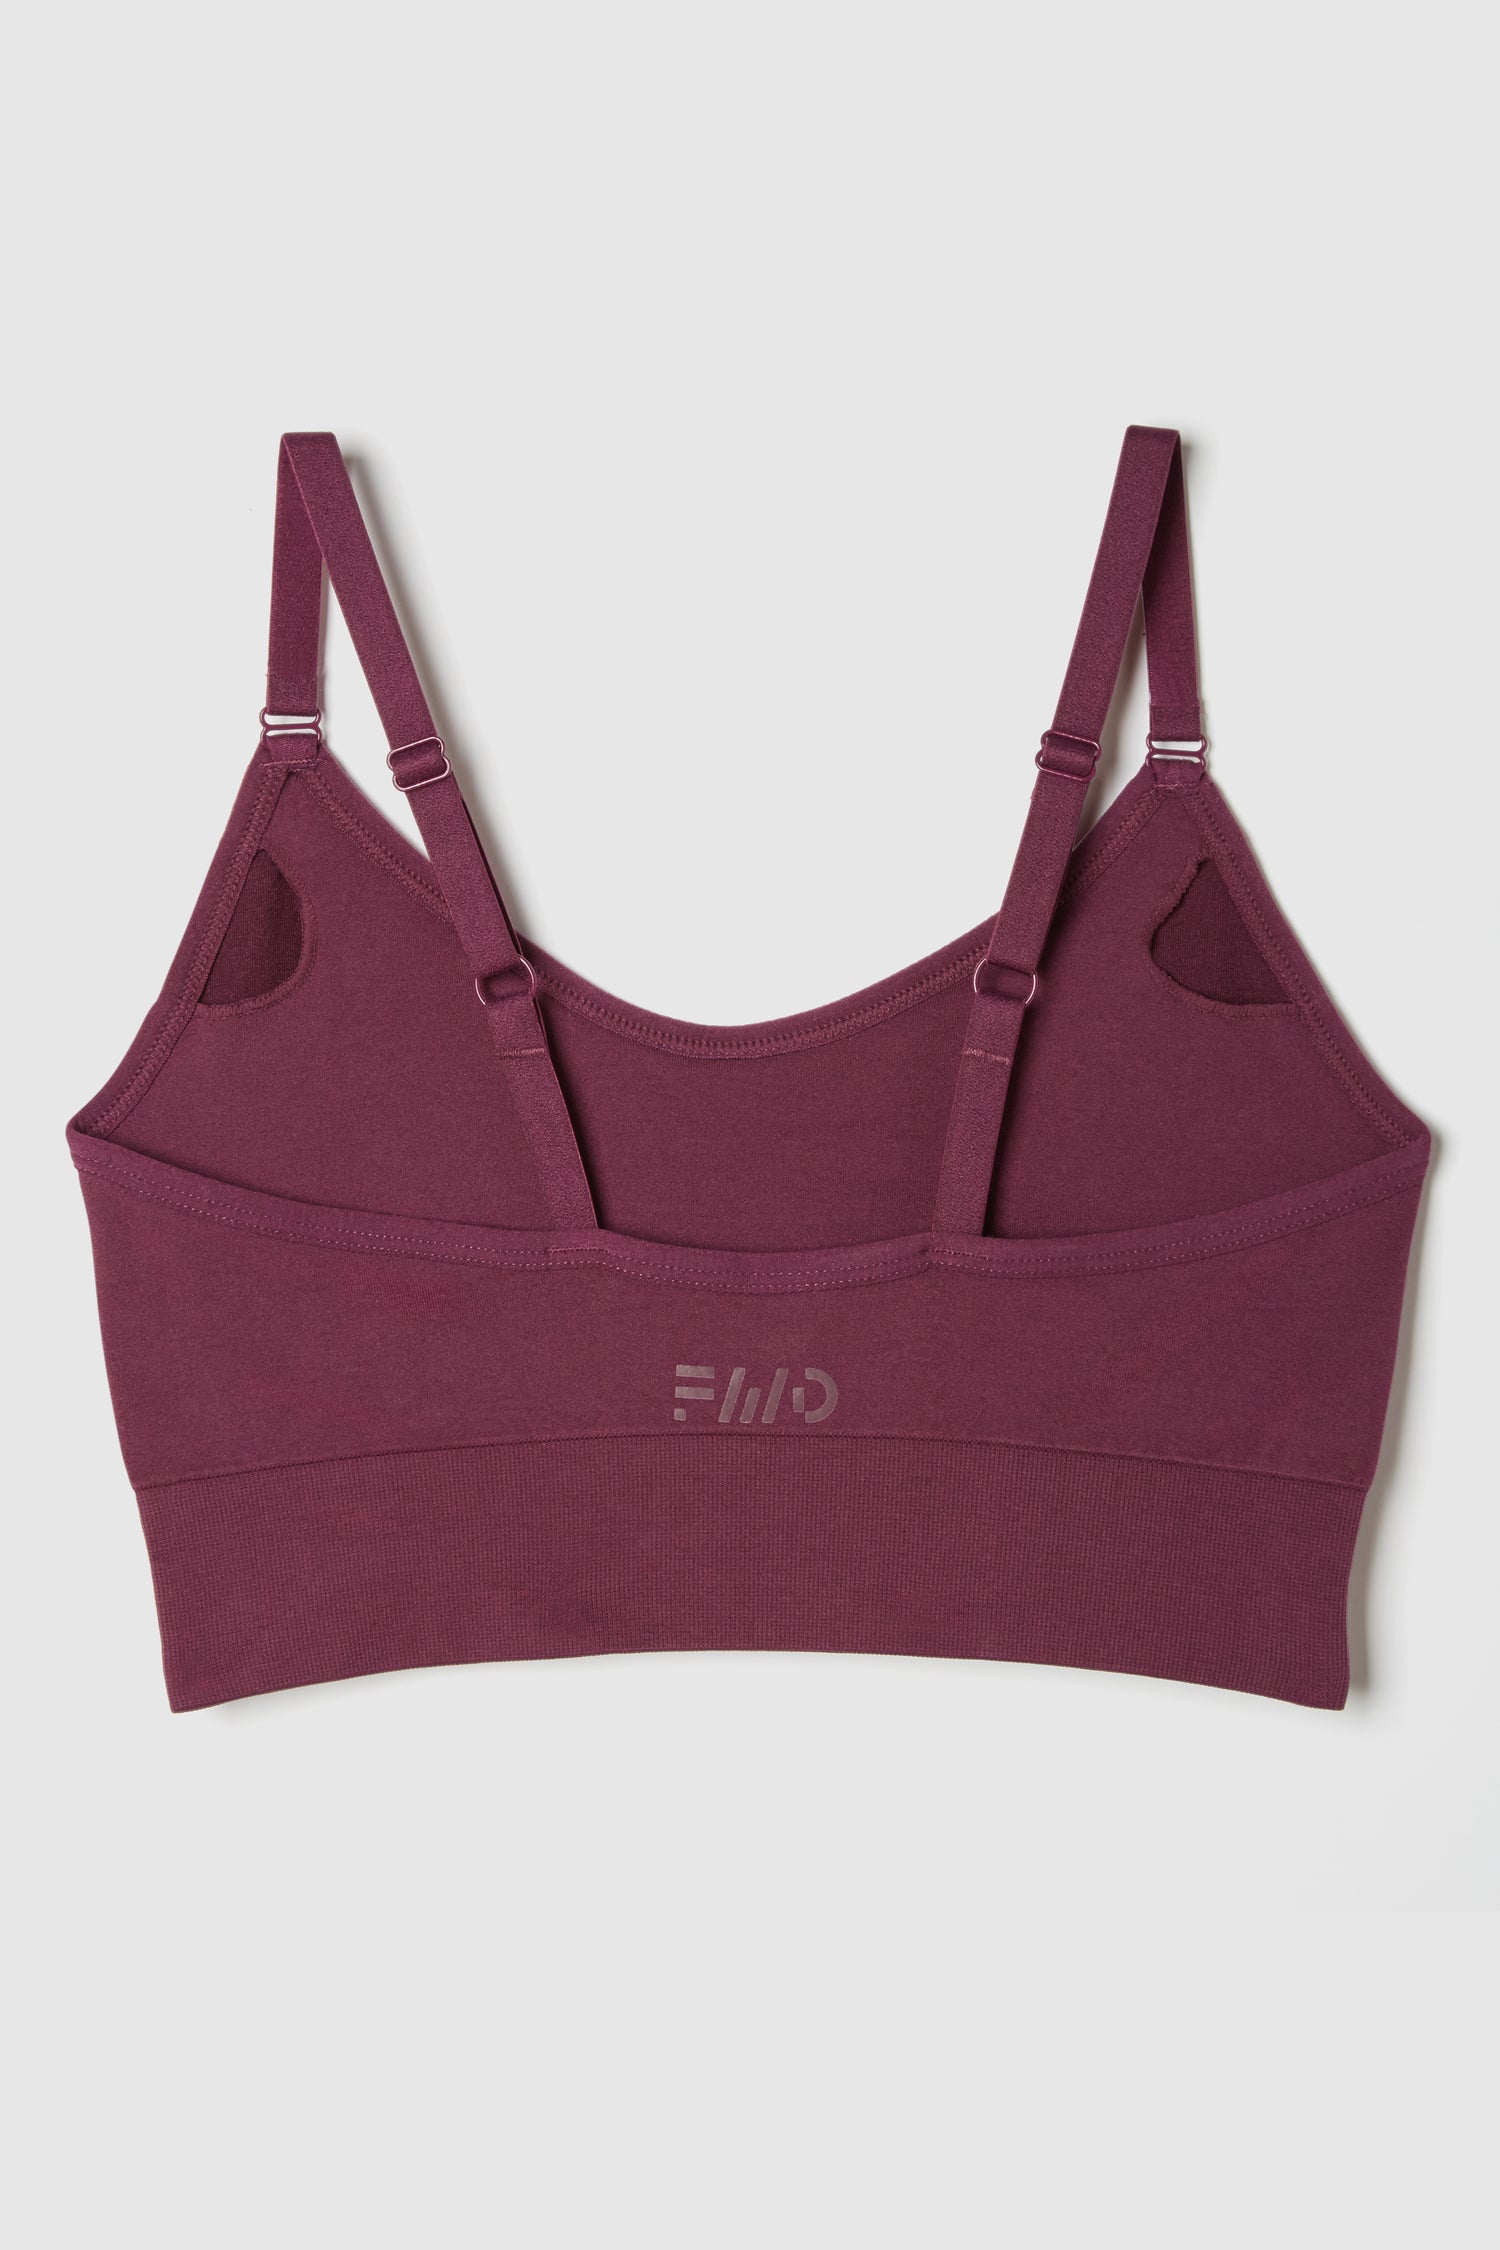 FWD Women's Seamless Sports Bra, Low Impact, Removable Pads